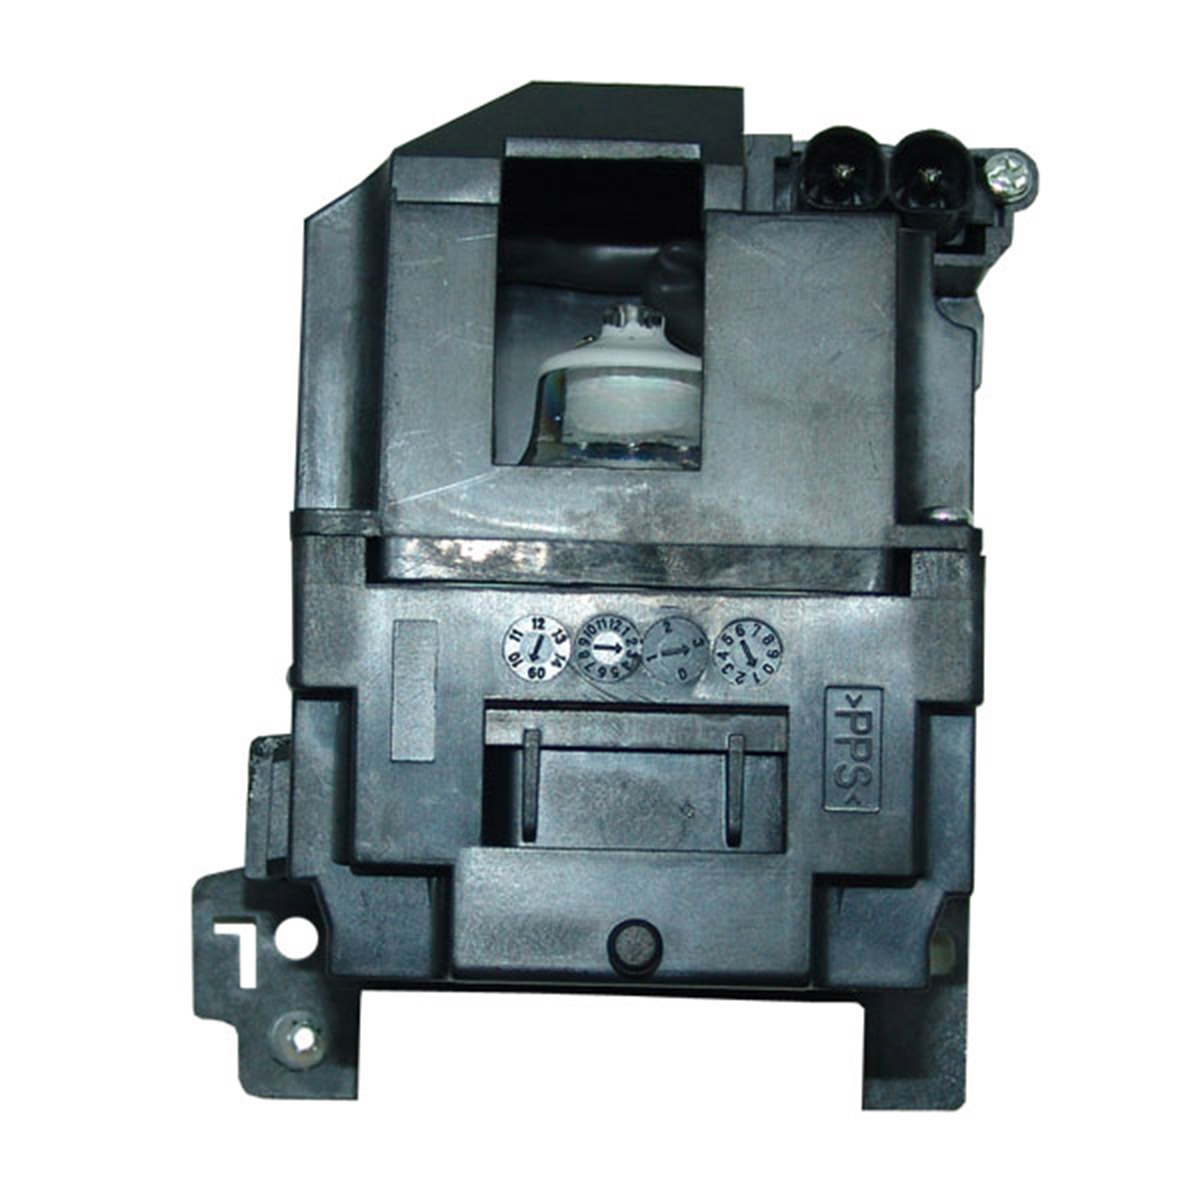 Lamp & Housing for the Dukane Image Pro 8755D-RJ Projector - 90 Day Warranty - image 4 of 4